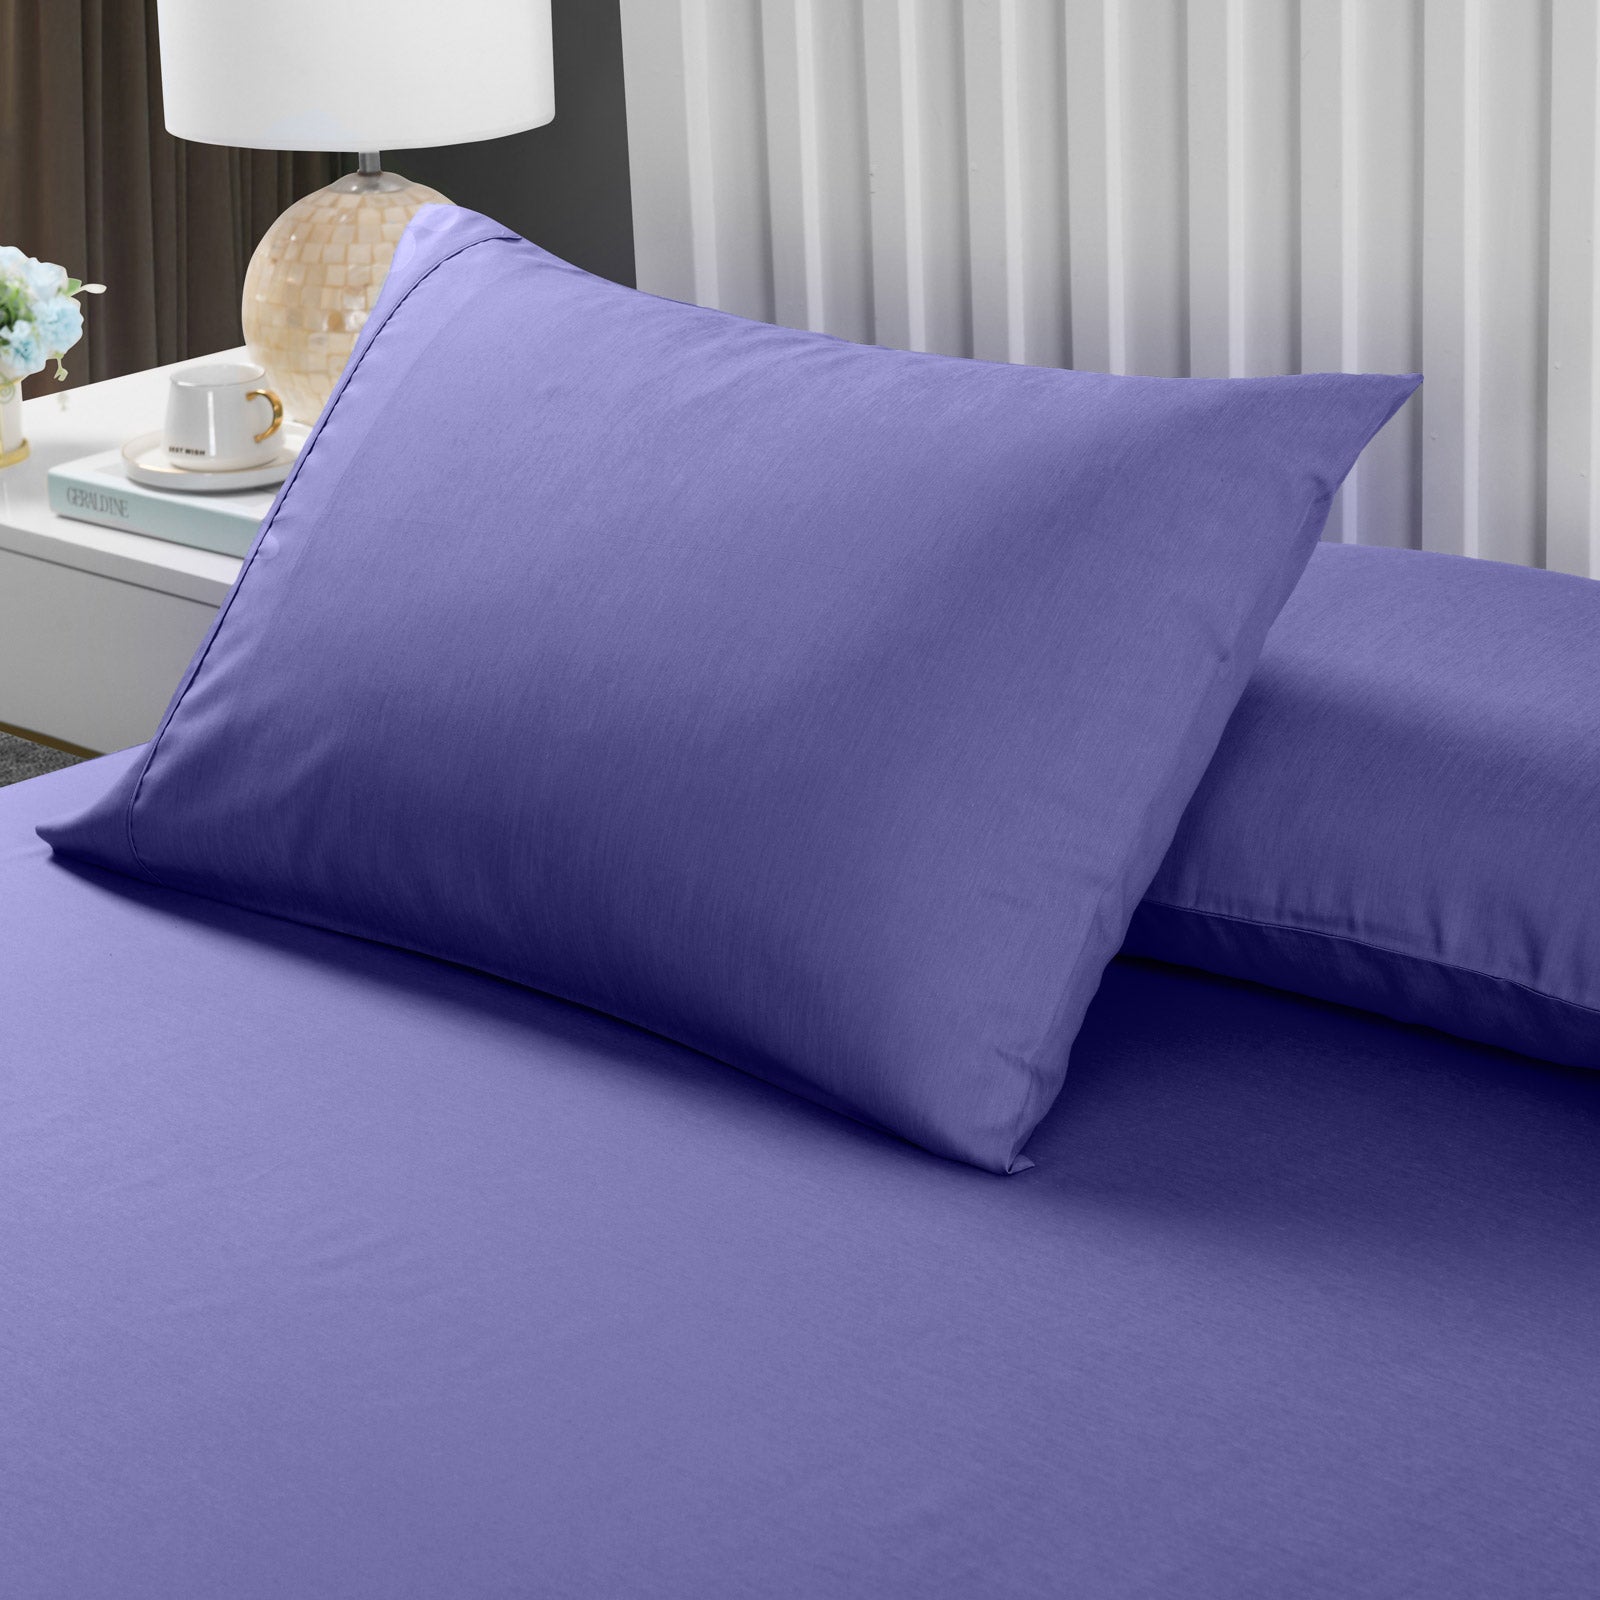 Royal Comfort 2000TC 3 Piece Fitted Sheet and Pillowcase Set Bamboo Cooling - Queen - Royal Blue from Deals499 at Deals499